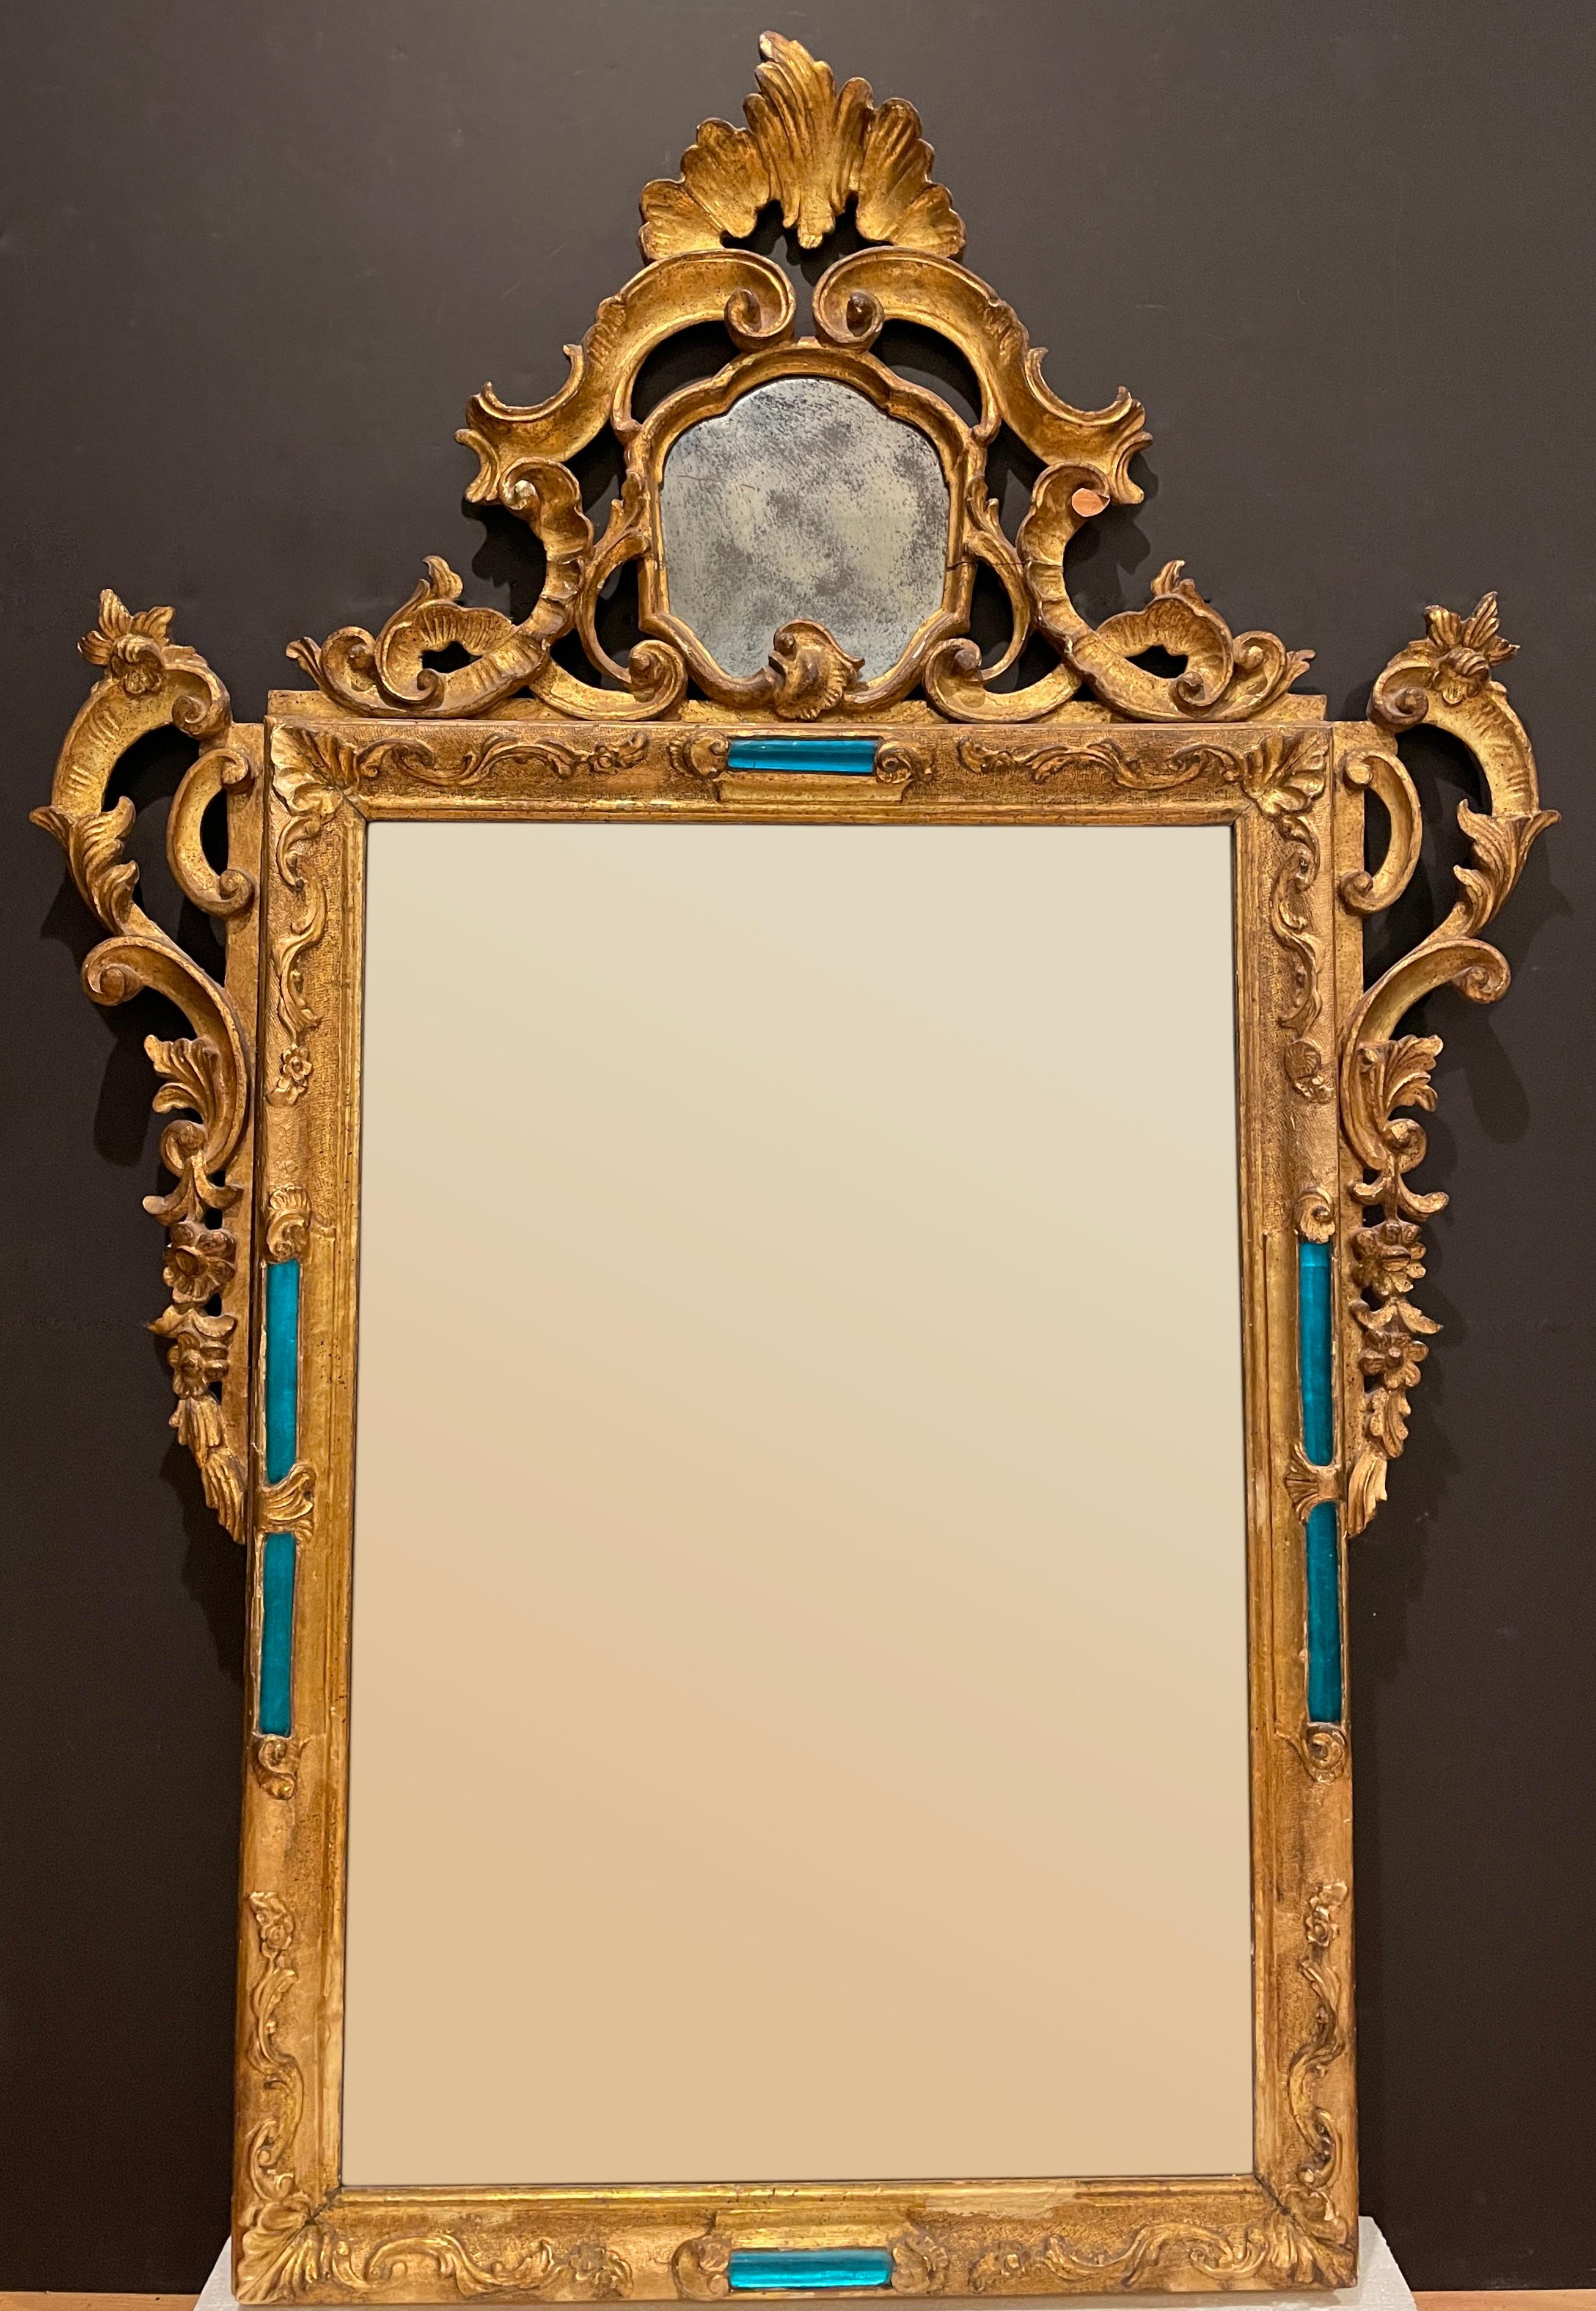 Highly unusual 19th century Baroque Rococo Venetian carved giltwood mirror. Featuring two mirrored panels and aqua blue/blue blown glass inset rods and original mirror with areas of spotted silvering losses.